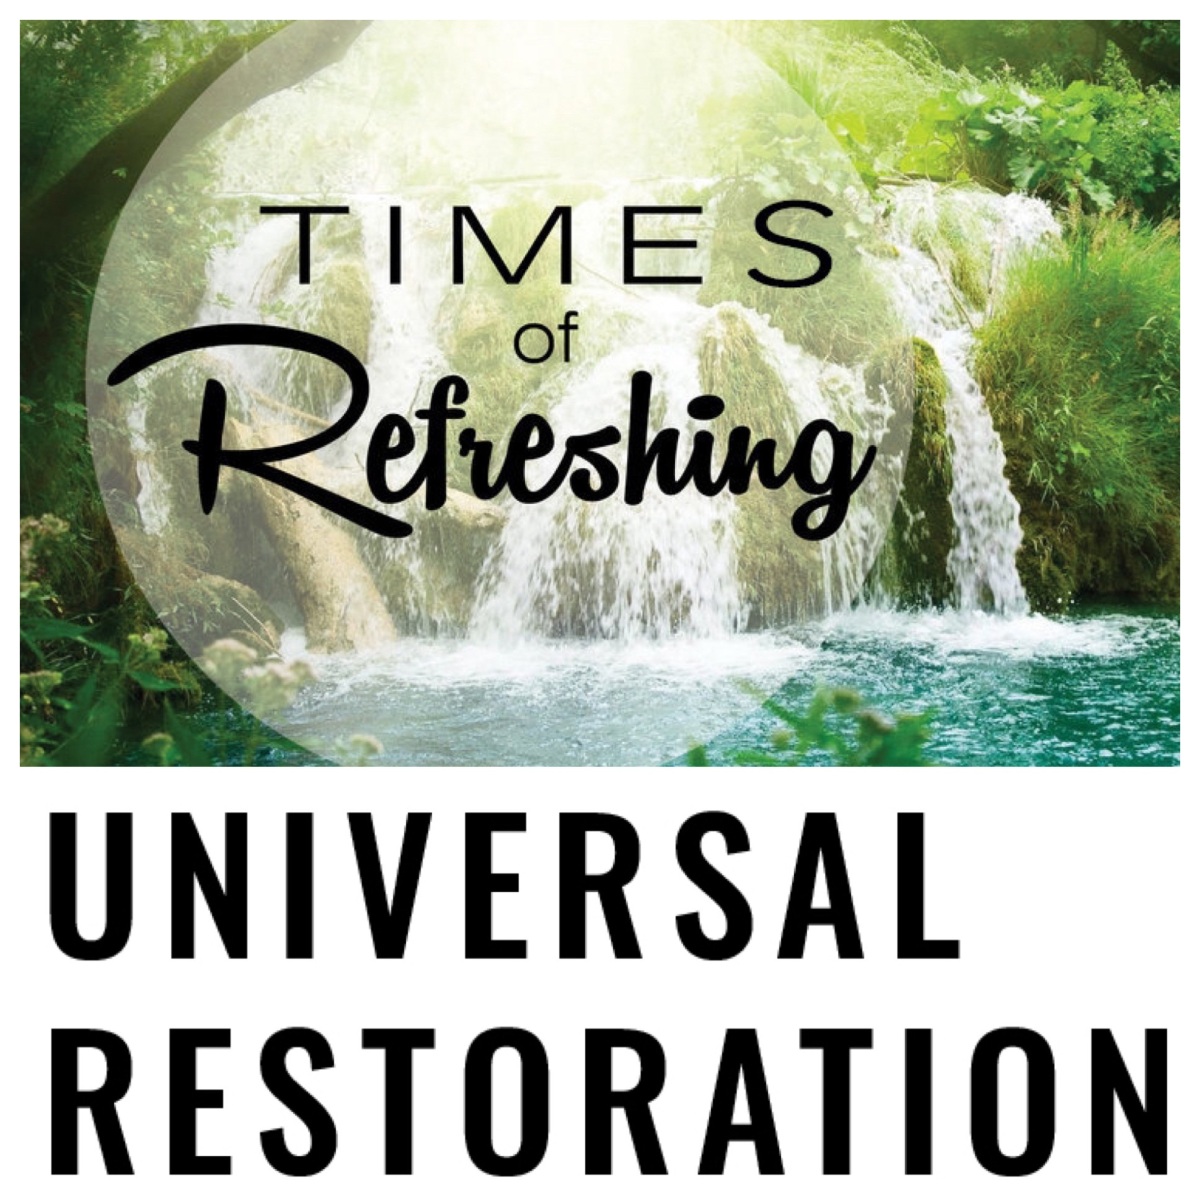 Times of refreshing, of universal restoration (Acts 3; Easter 3B)